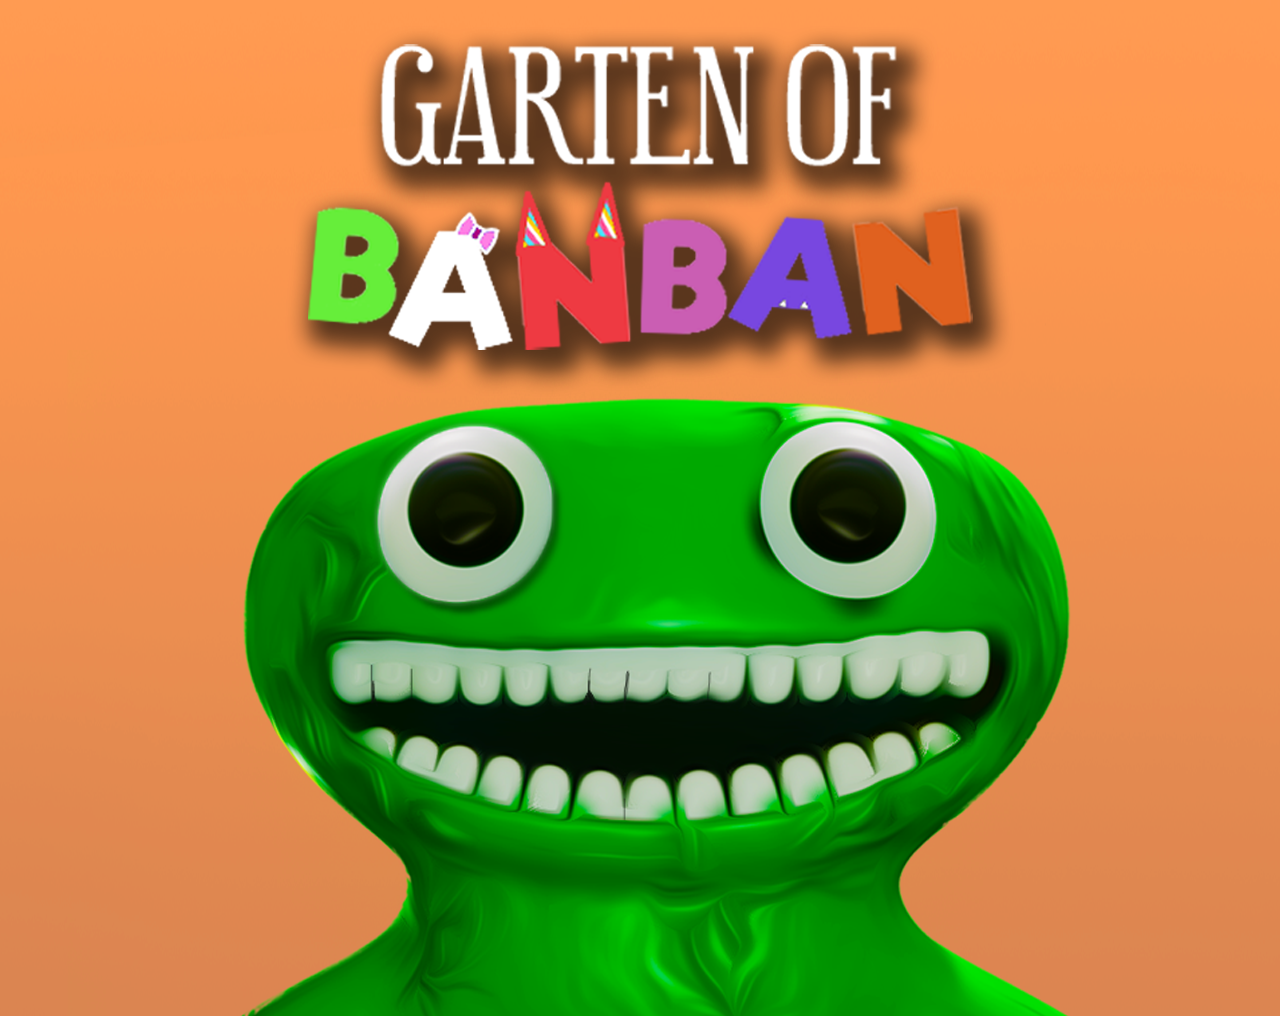 comments-427-to-388-of-717-garten-of-banban-by-euphoric-brothers